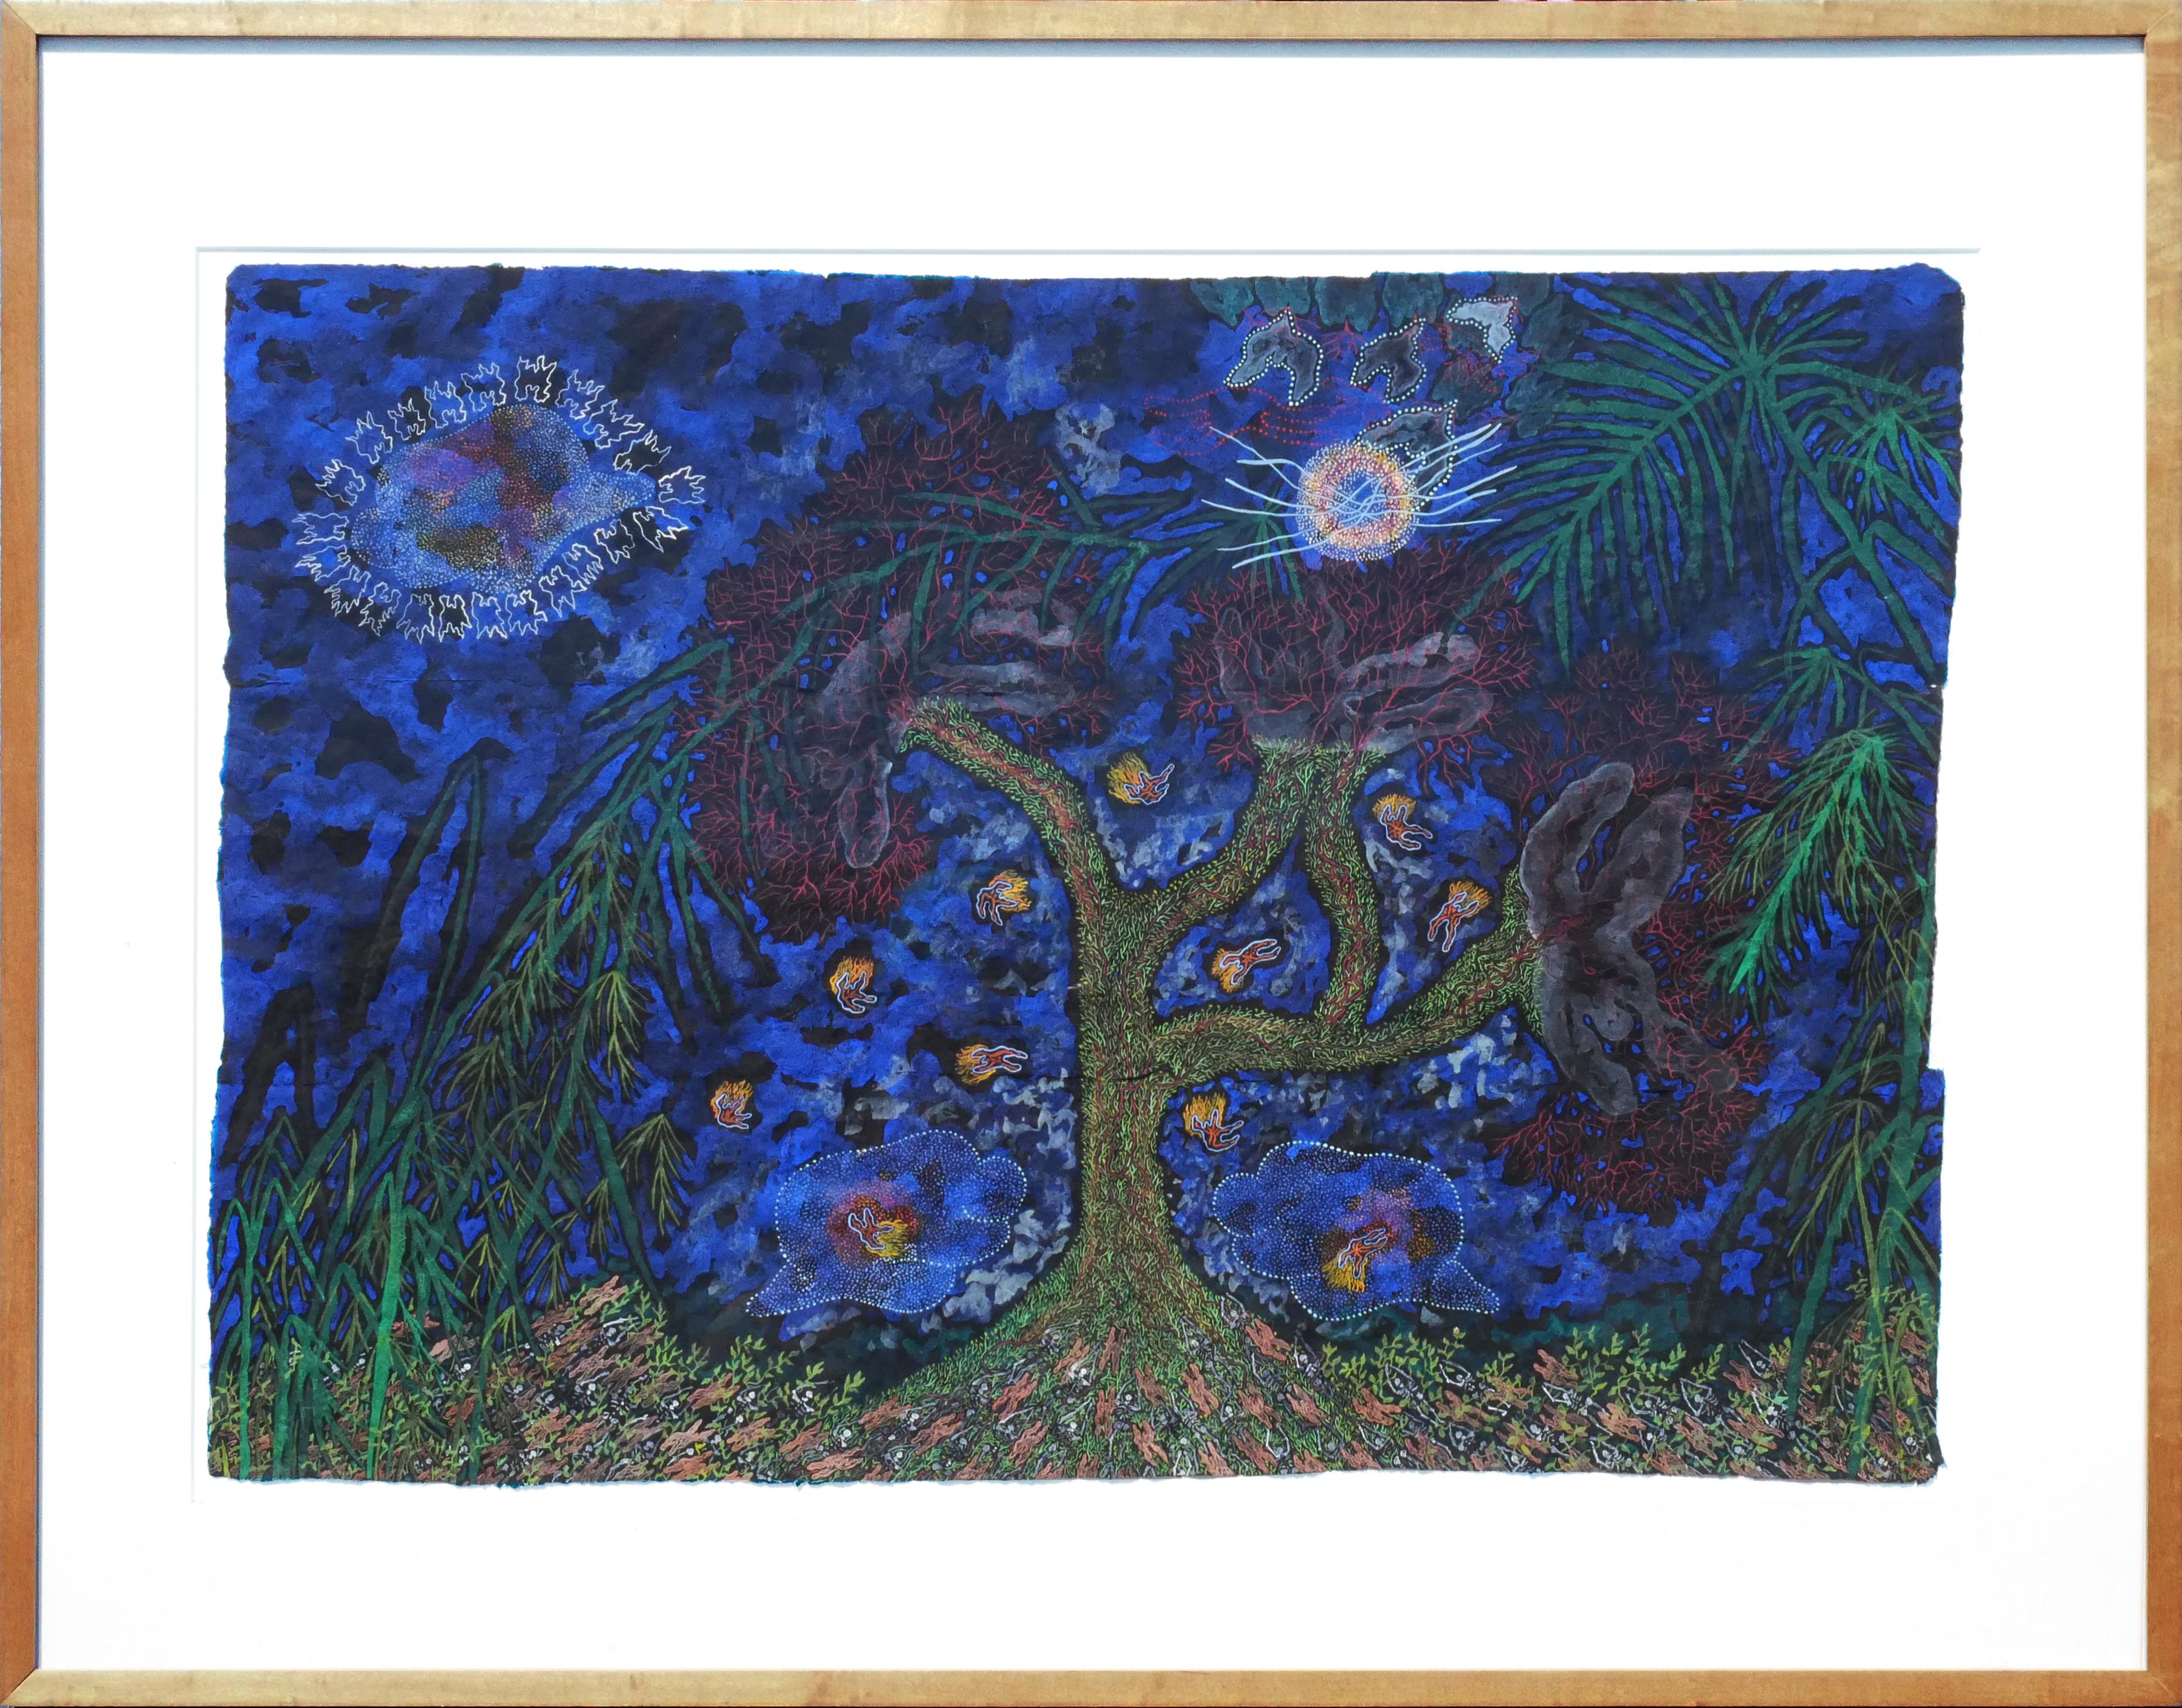 Dee Wolff Abstract Drawing - "Tree of Life, Tree of Death" Blue-Toned Abstract Painting of a Tree and Figures